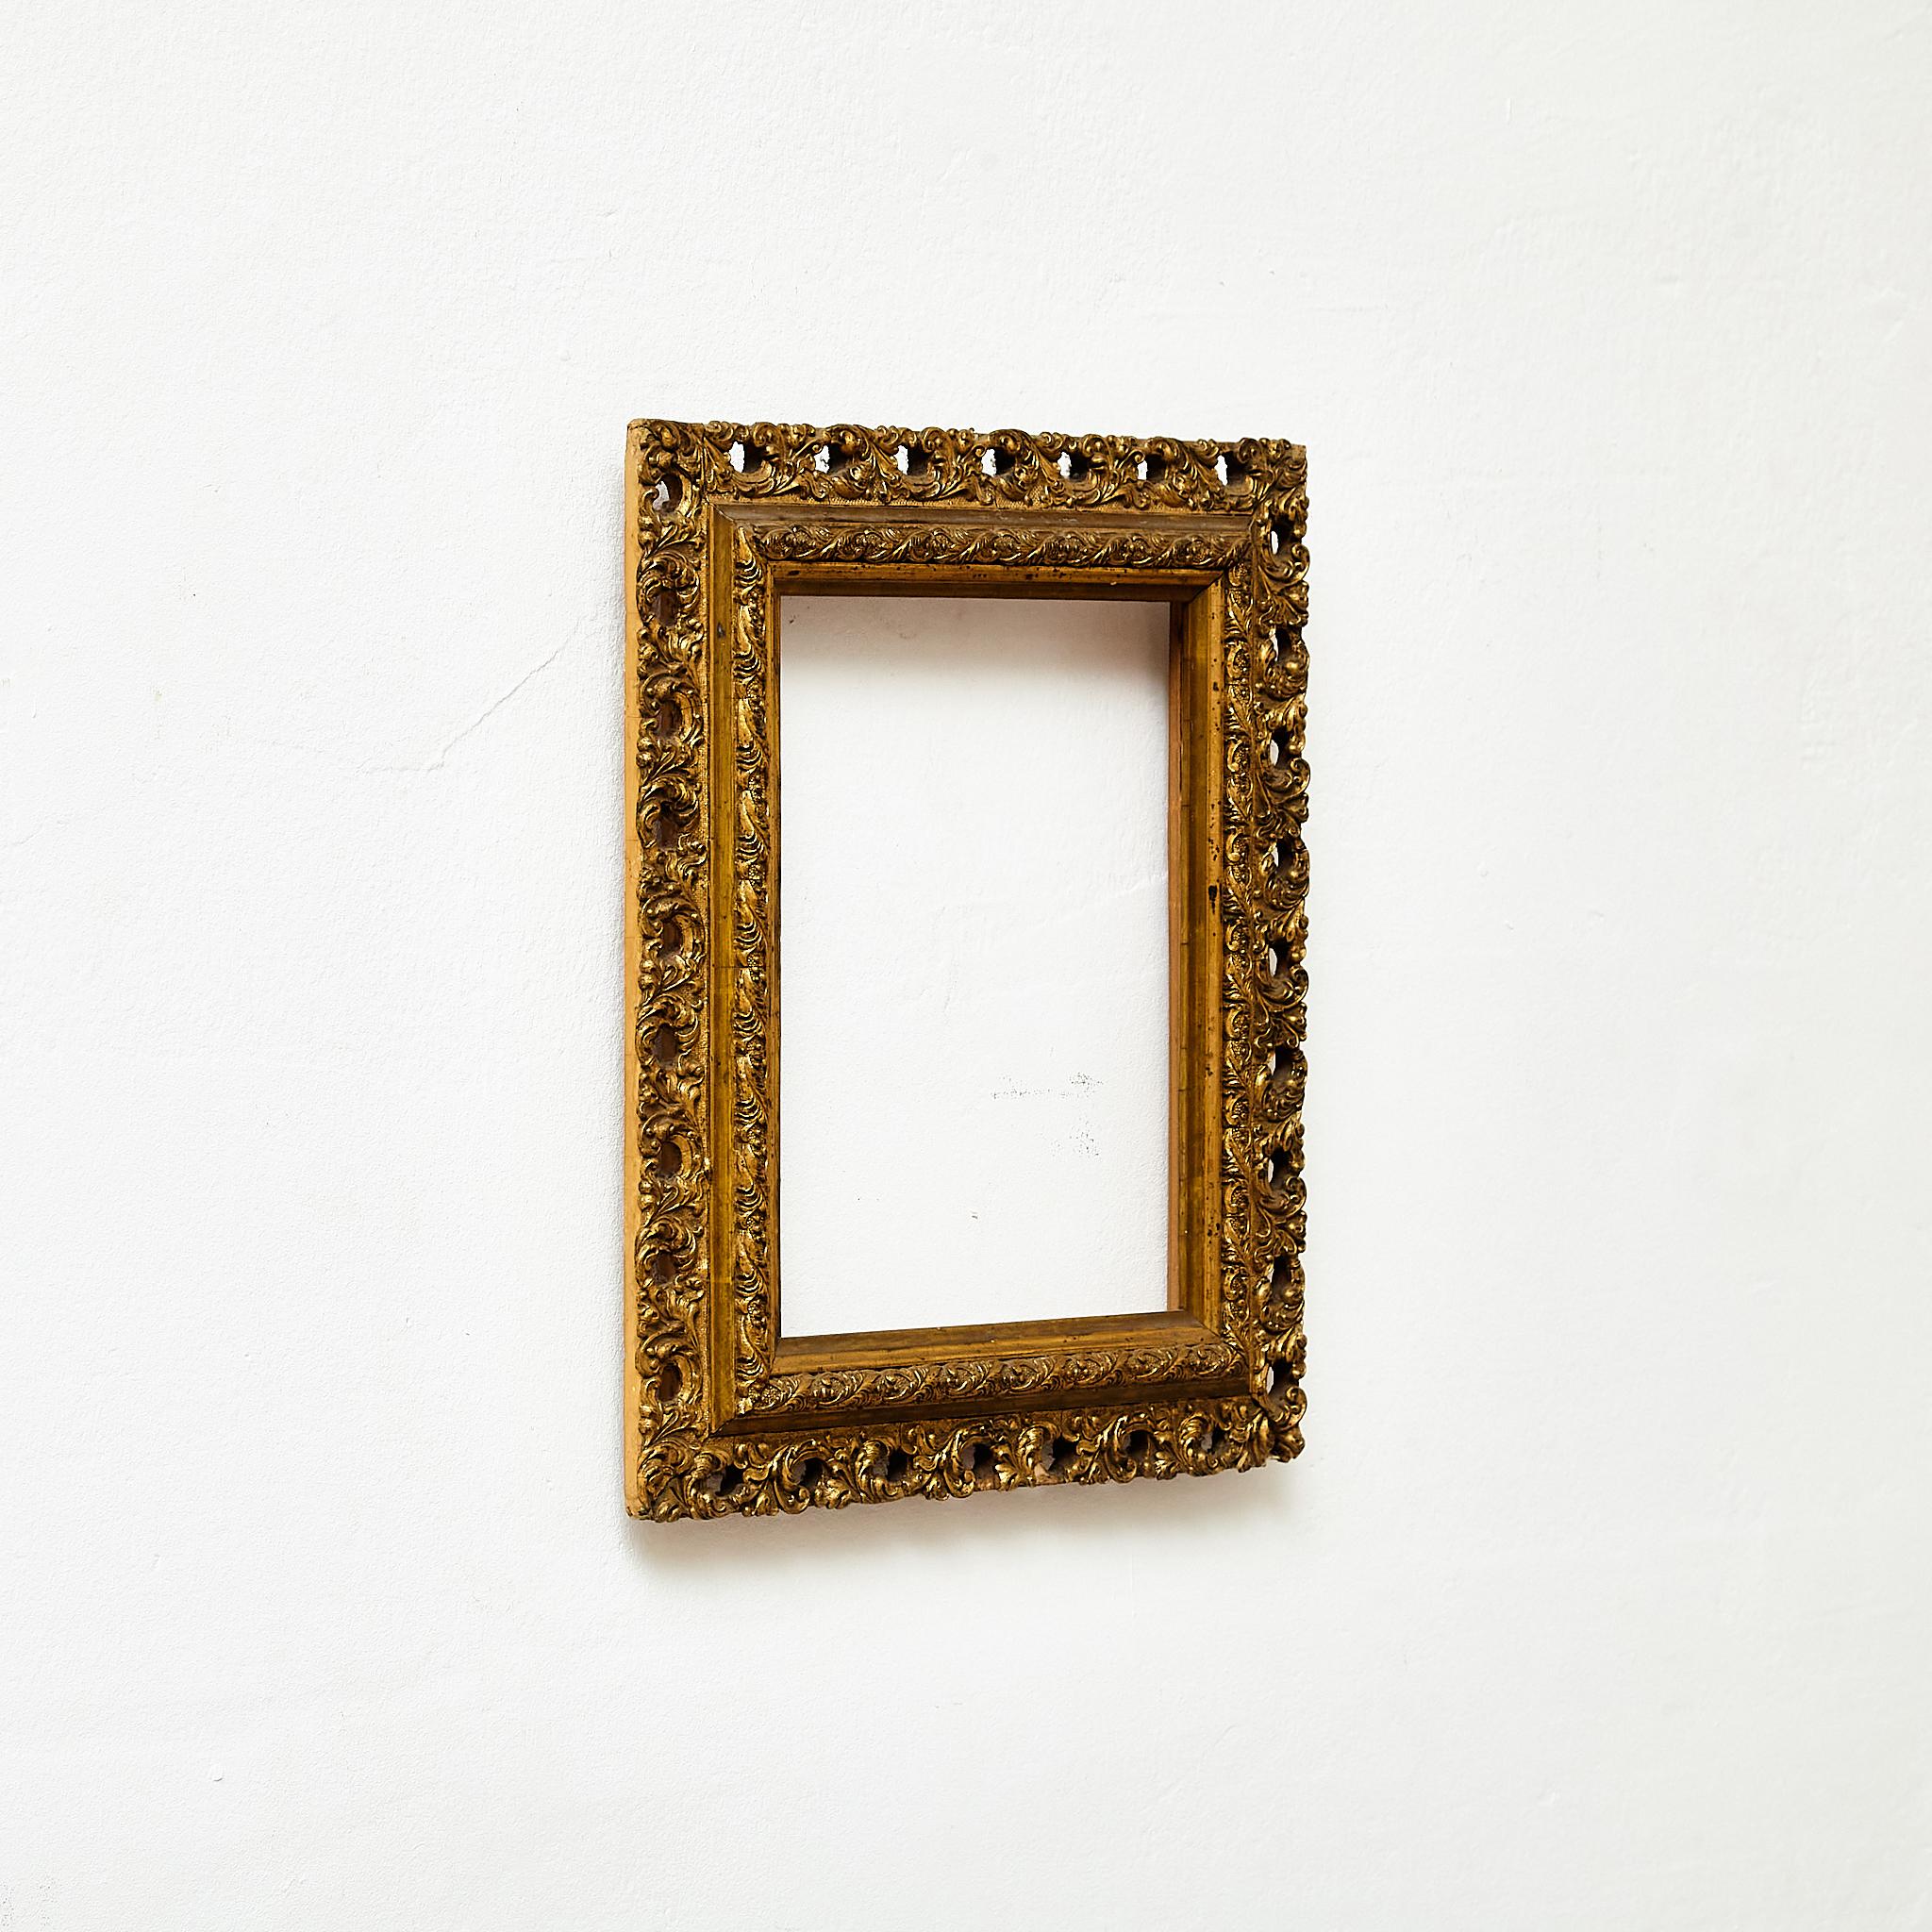 Antique Ornament Gold Wood Frame.

Manufactured France, circa 1930.

Materials:
Wood

Dimensions: 
D 3.5 x W 30 cm x H 35.5 cm

In original condition, with minor wear consistent with age and use, preserving a beautiful patina.

Important